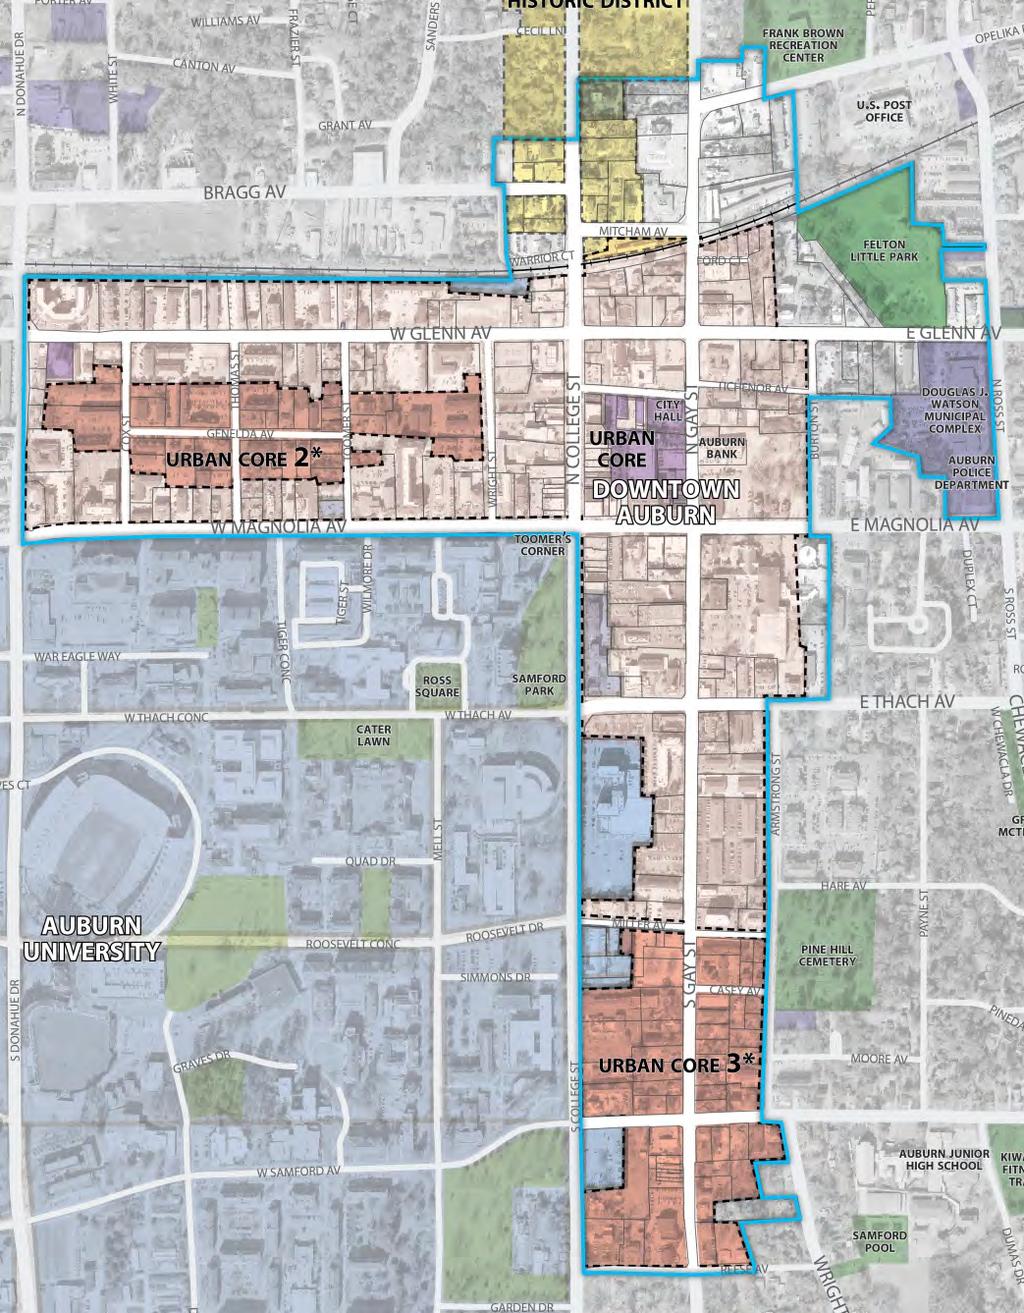 AUBURN DOWNTOWN STUDY AREA Study boundary: 228 acres Parcel area: 194 acres Rich history associated with the railroad and Auburn University Major peripheral streets: College, Magnolia, Donahue,